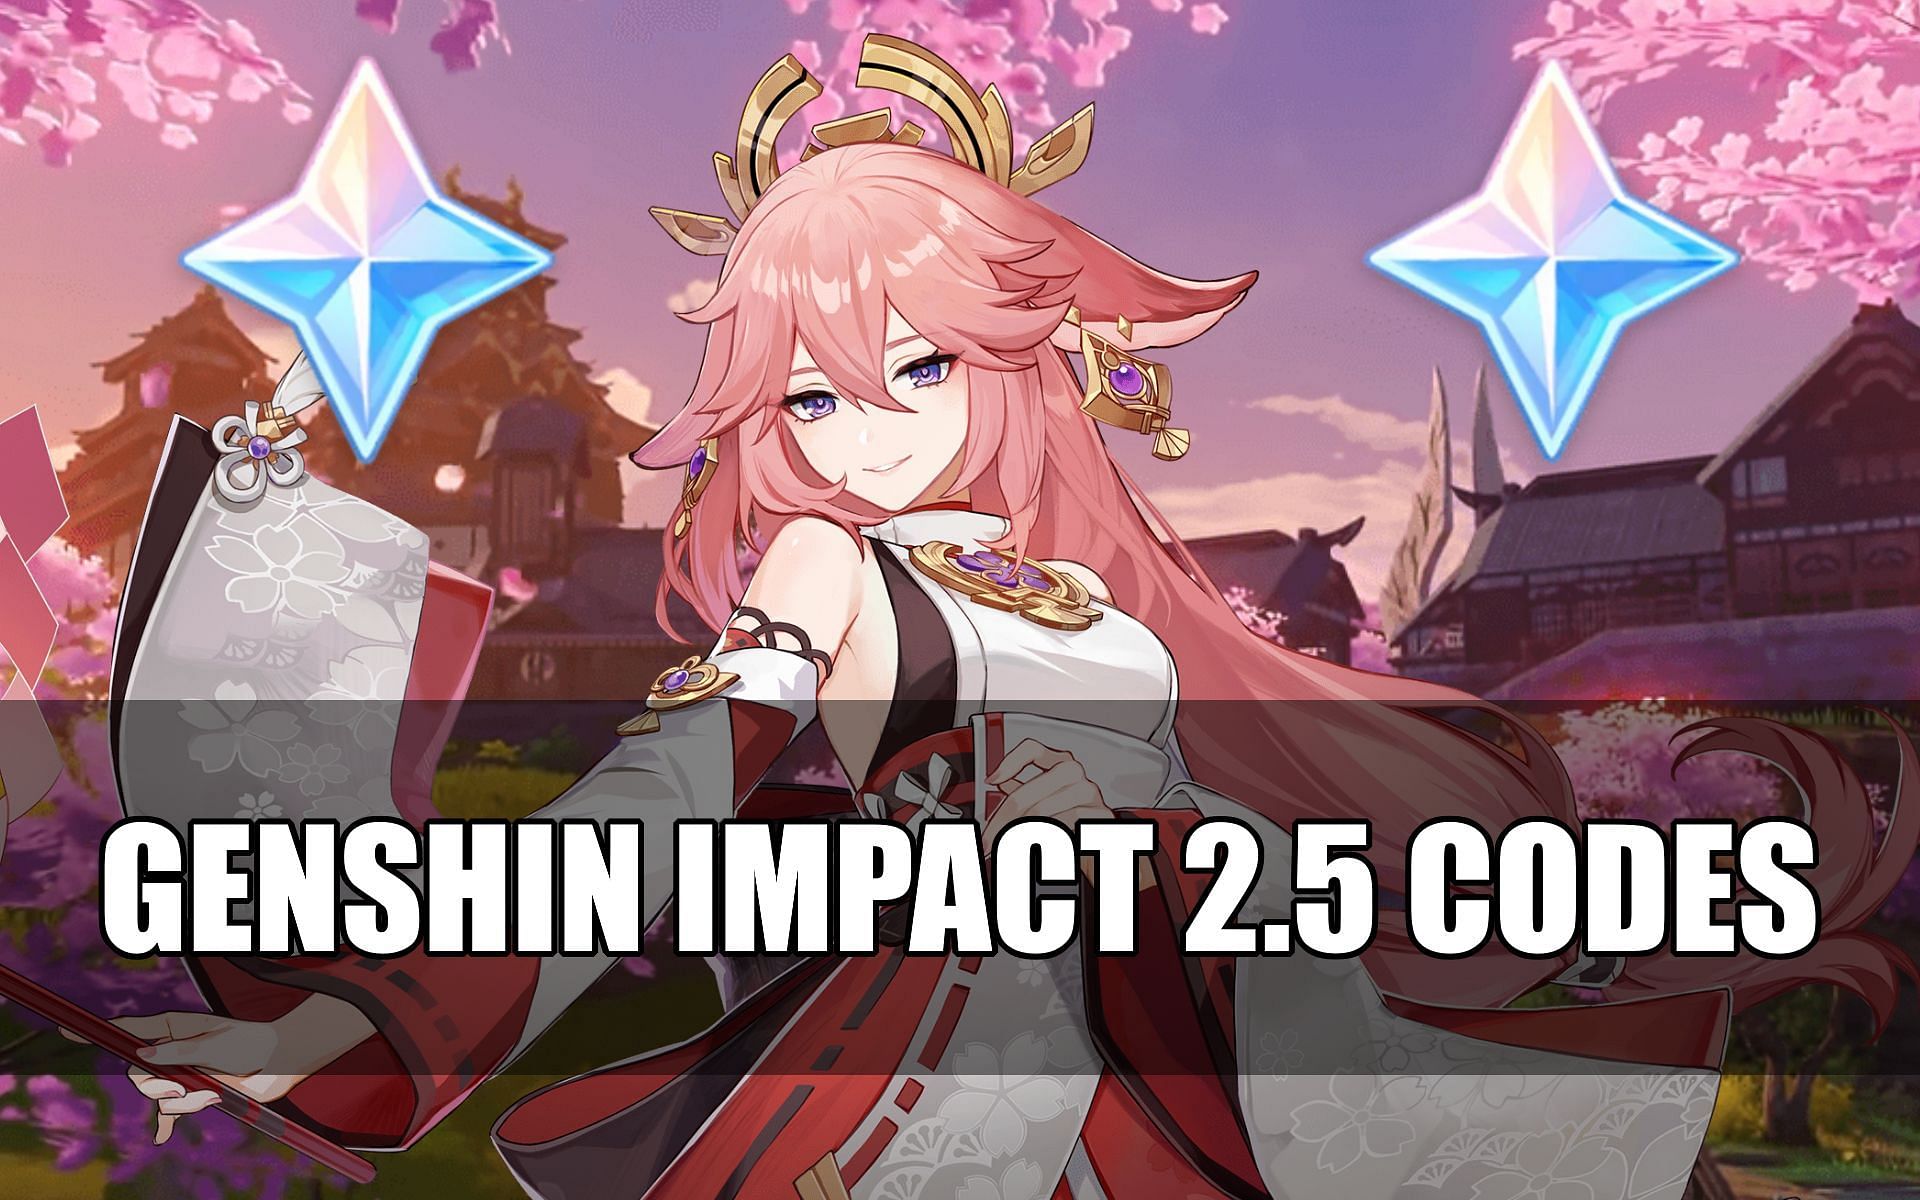 Here are three new Code Redeem for Genshin Impact with the 2.5 reveal -  Millenium